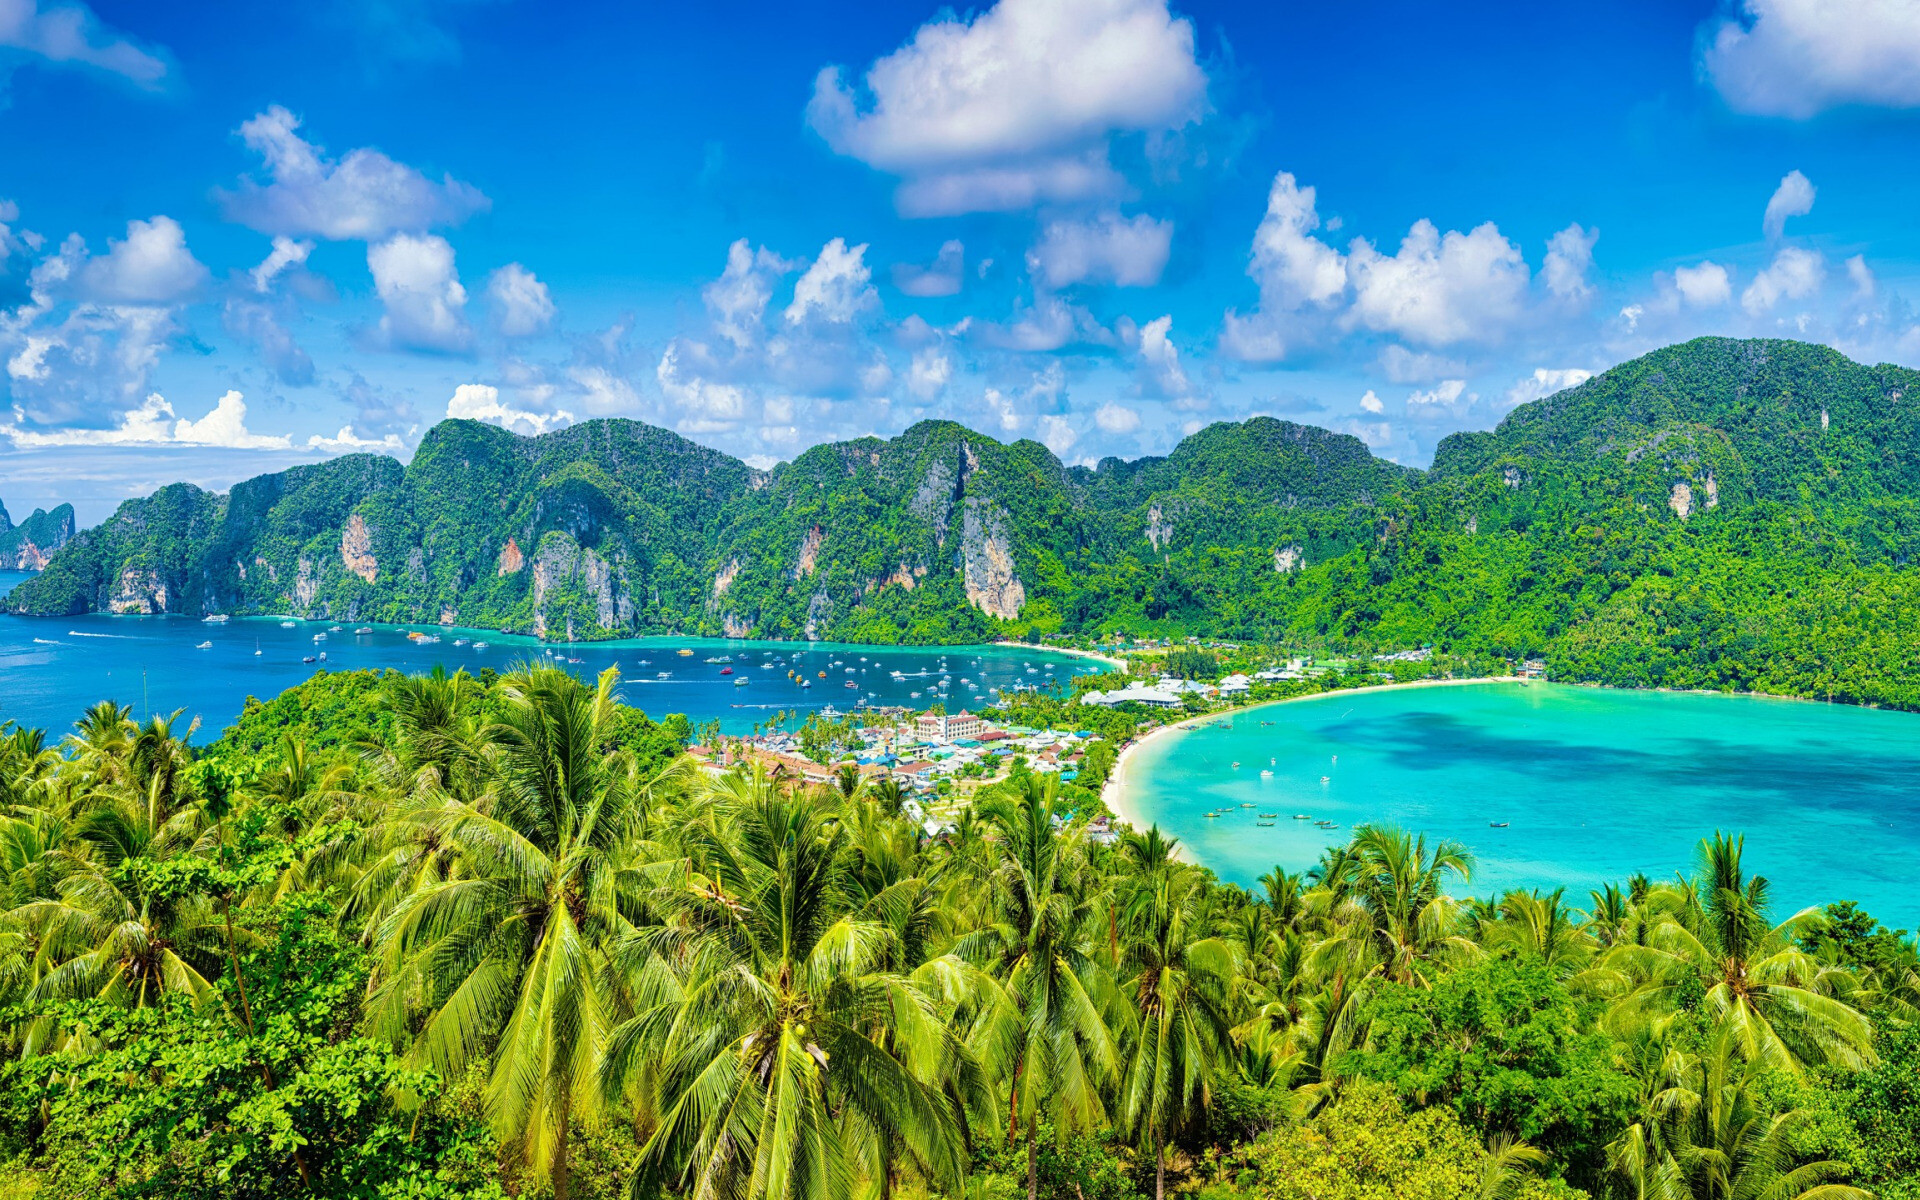 Phi Phi: One of Thailand's most beautiful and exciting islands, Bay, Palm trees, Tropical islands. 1920x1200 HD Wallpaper.